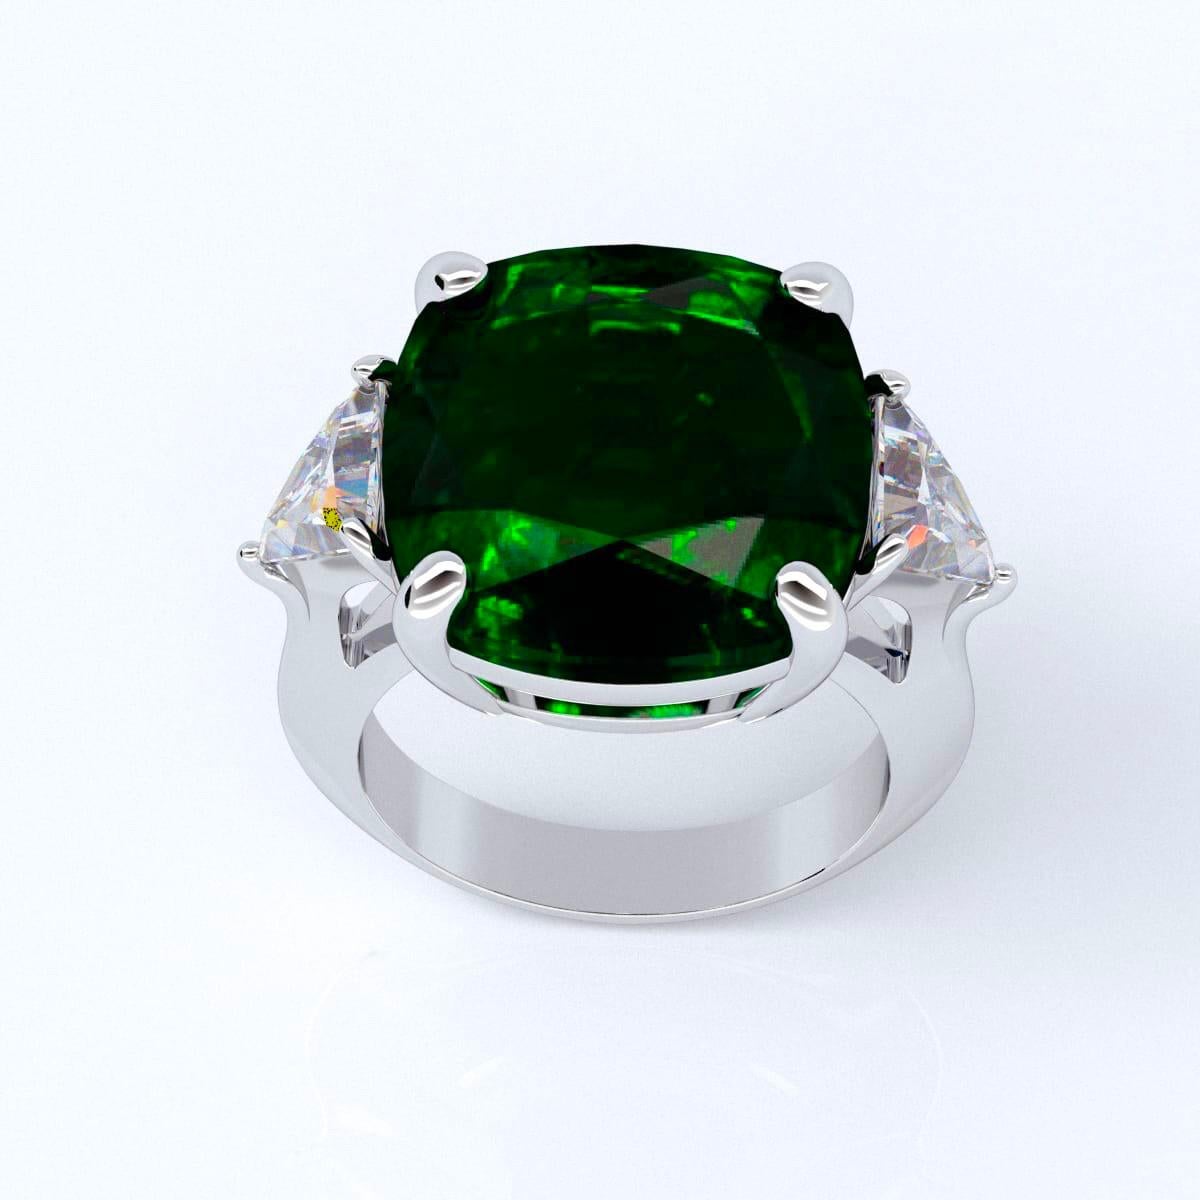 Approx total weight: 16.00CT
Approx Center Weight: 15.00ct 
The center Emerald is of gorgeous deep green color. It is also certified please inquire on the cert and we will gladly message it to you. 
Diamond Color: E-F 
Diamond Clarity: Vv1
Cut: